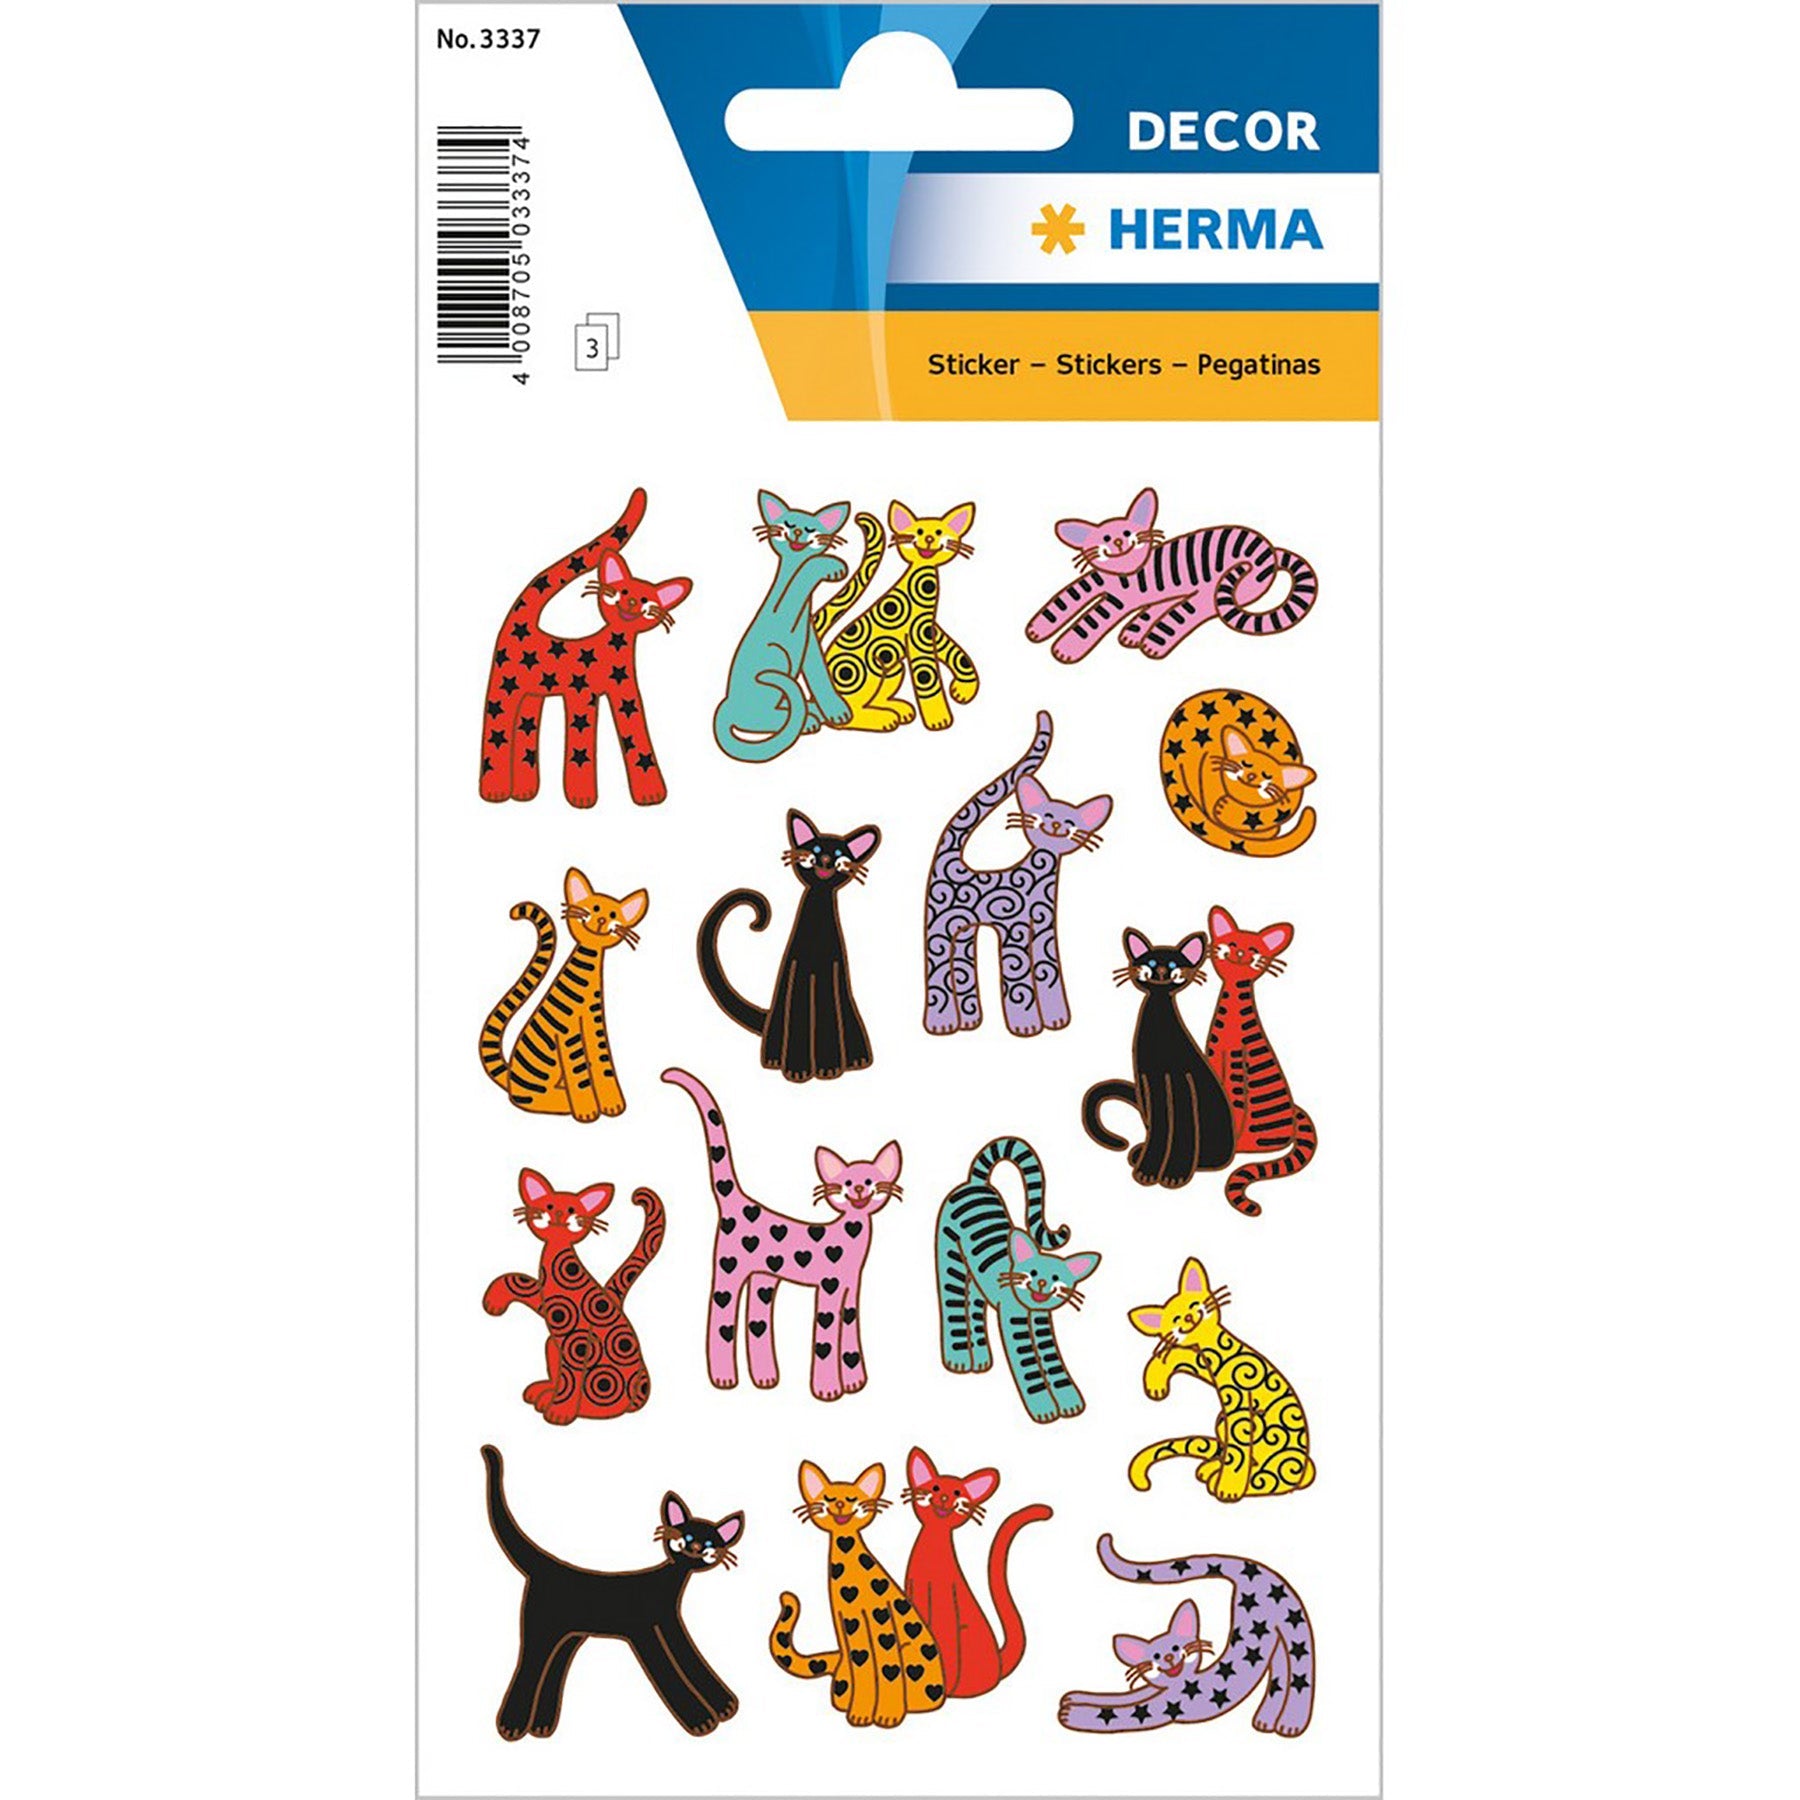 Herma Decor 3 Sheets Stickers Abstract Cats 4.75x3.1in Sheet